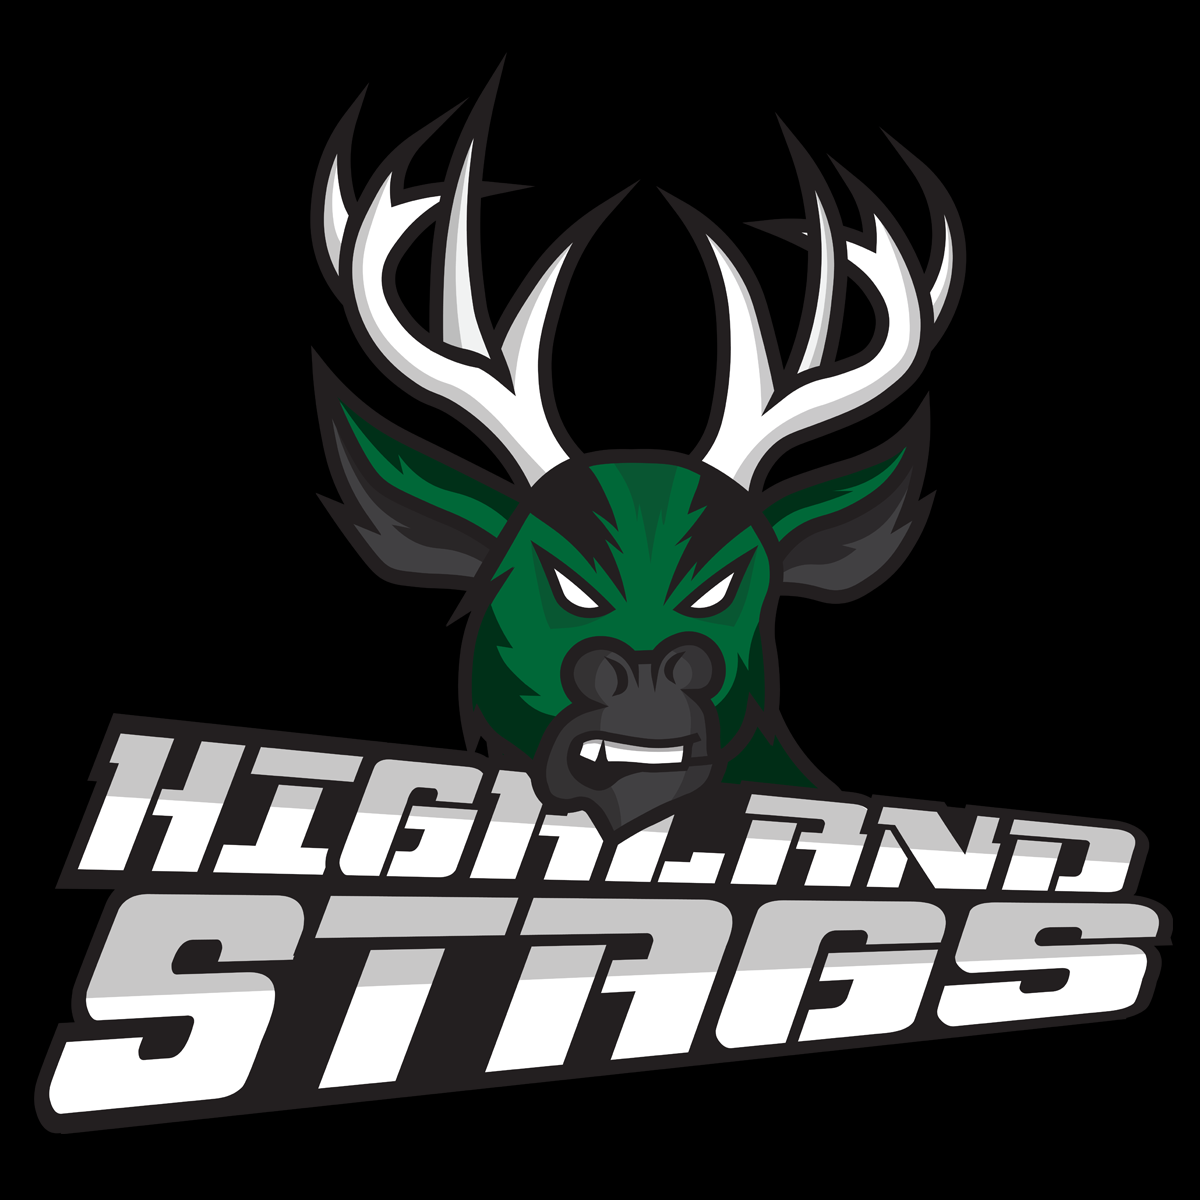 The logo for the Highland Stags